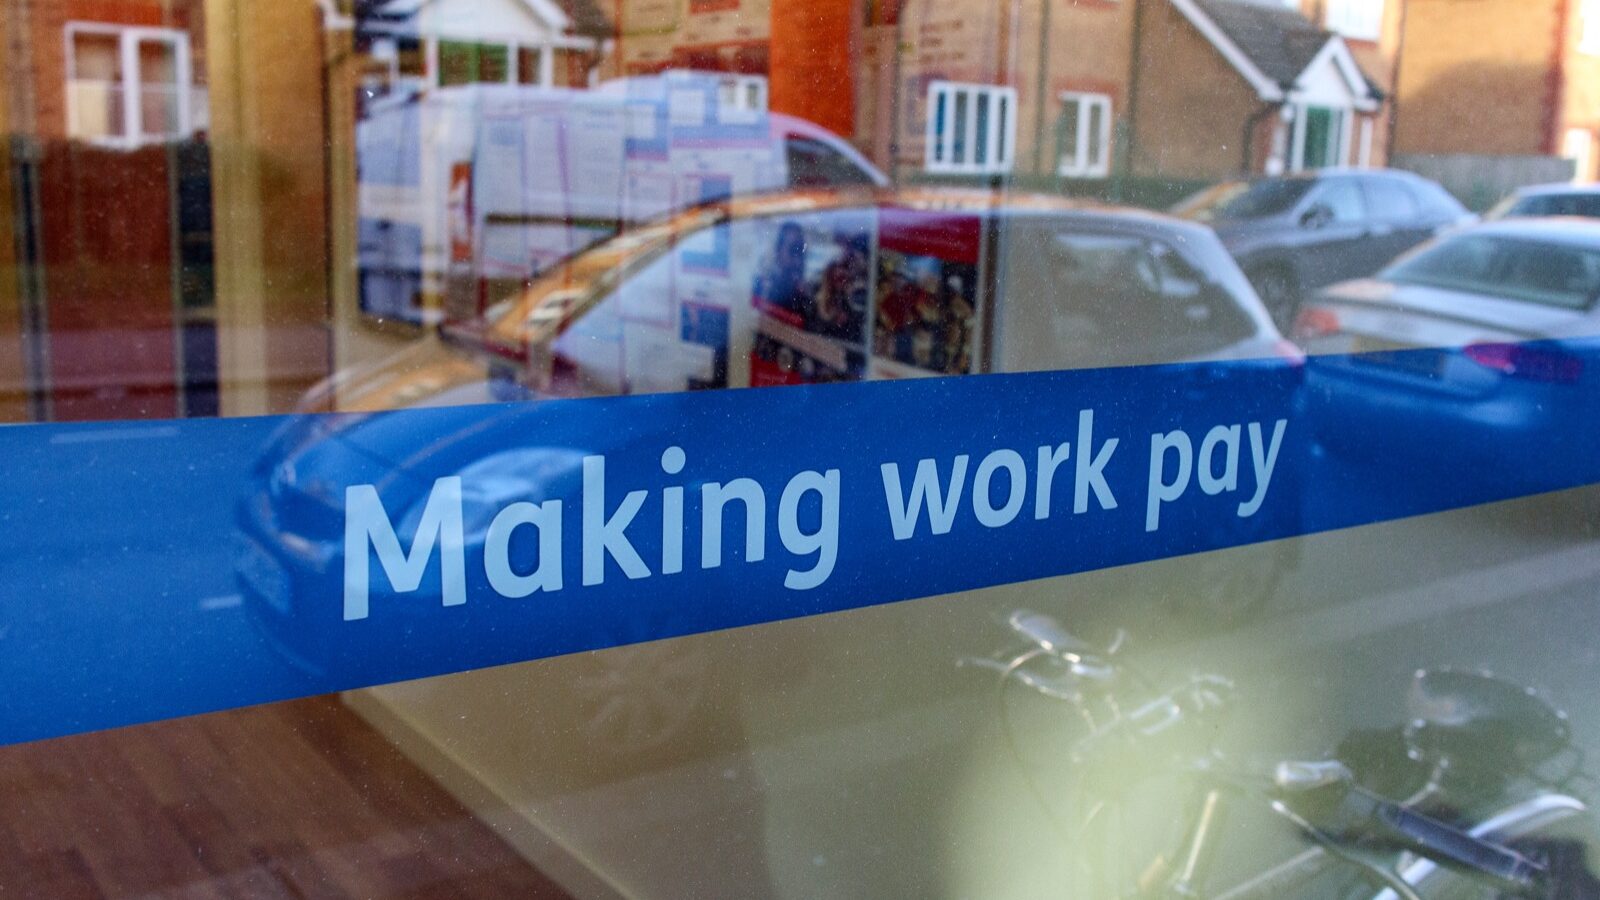 Making work pay sign